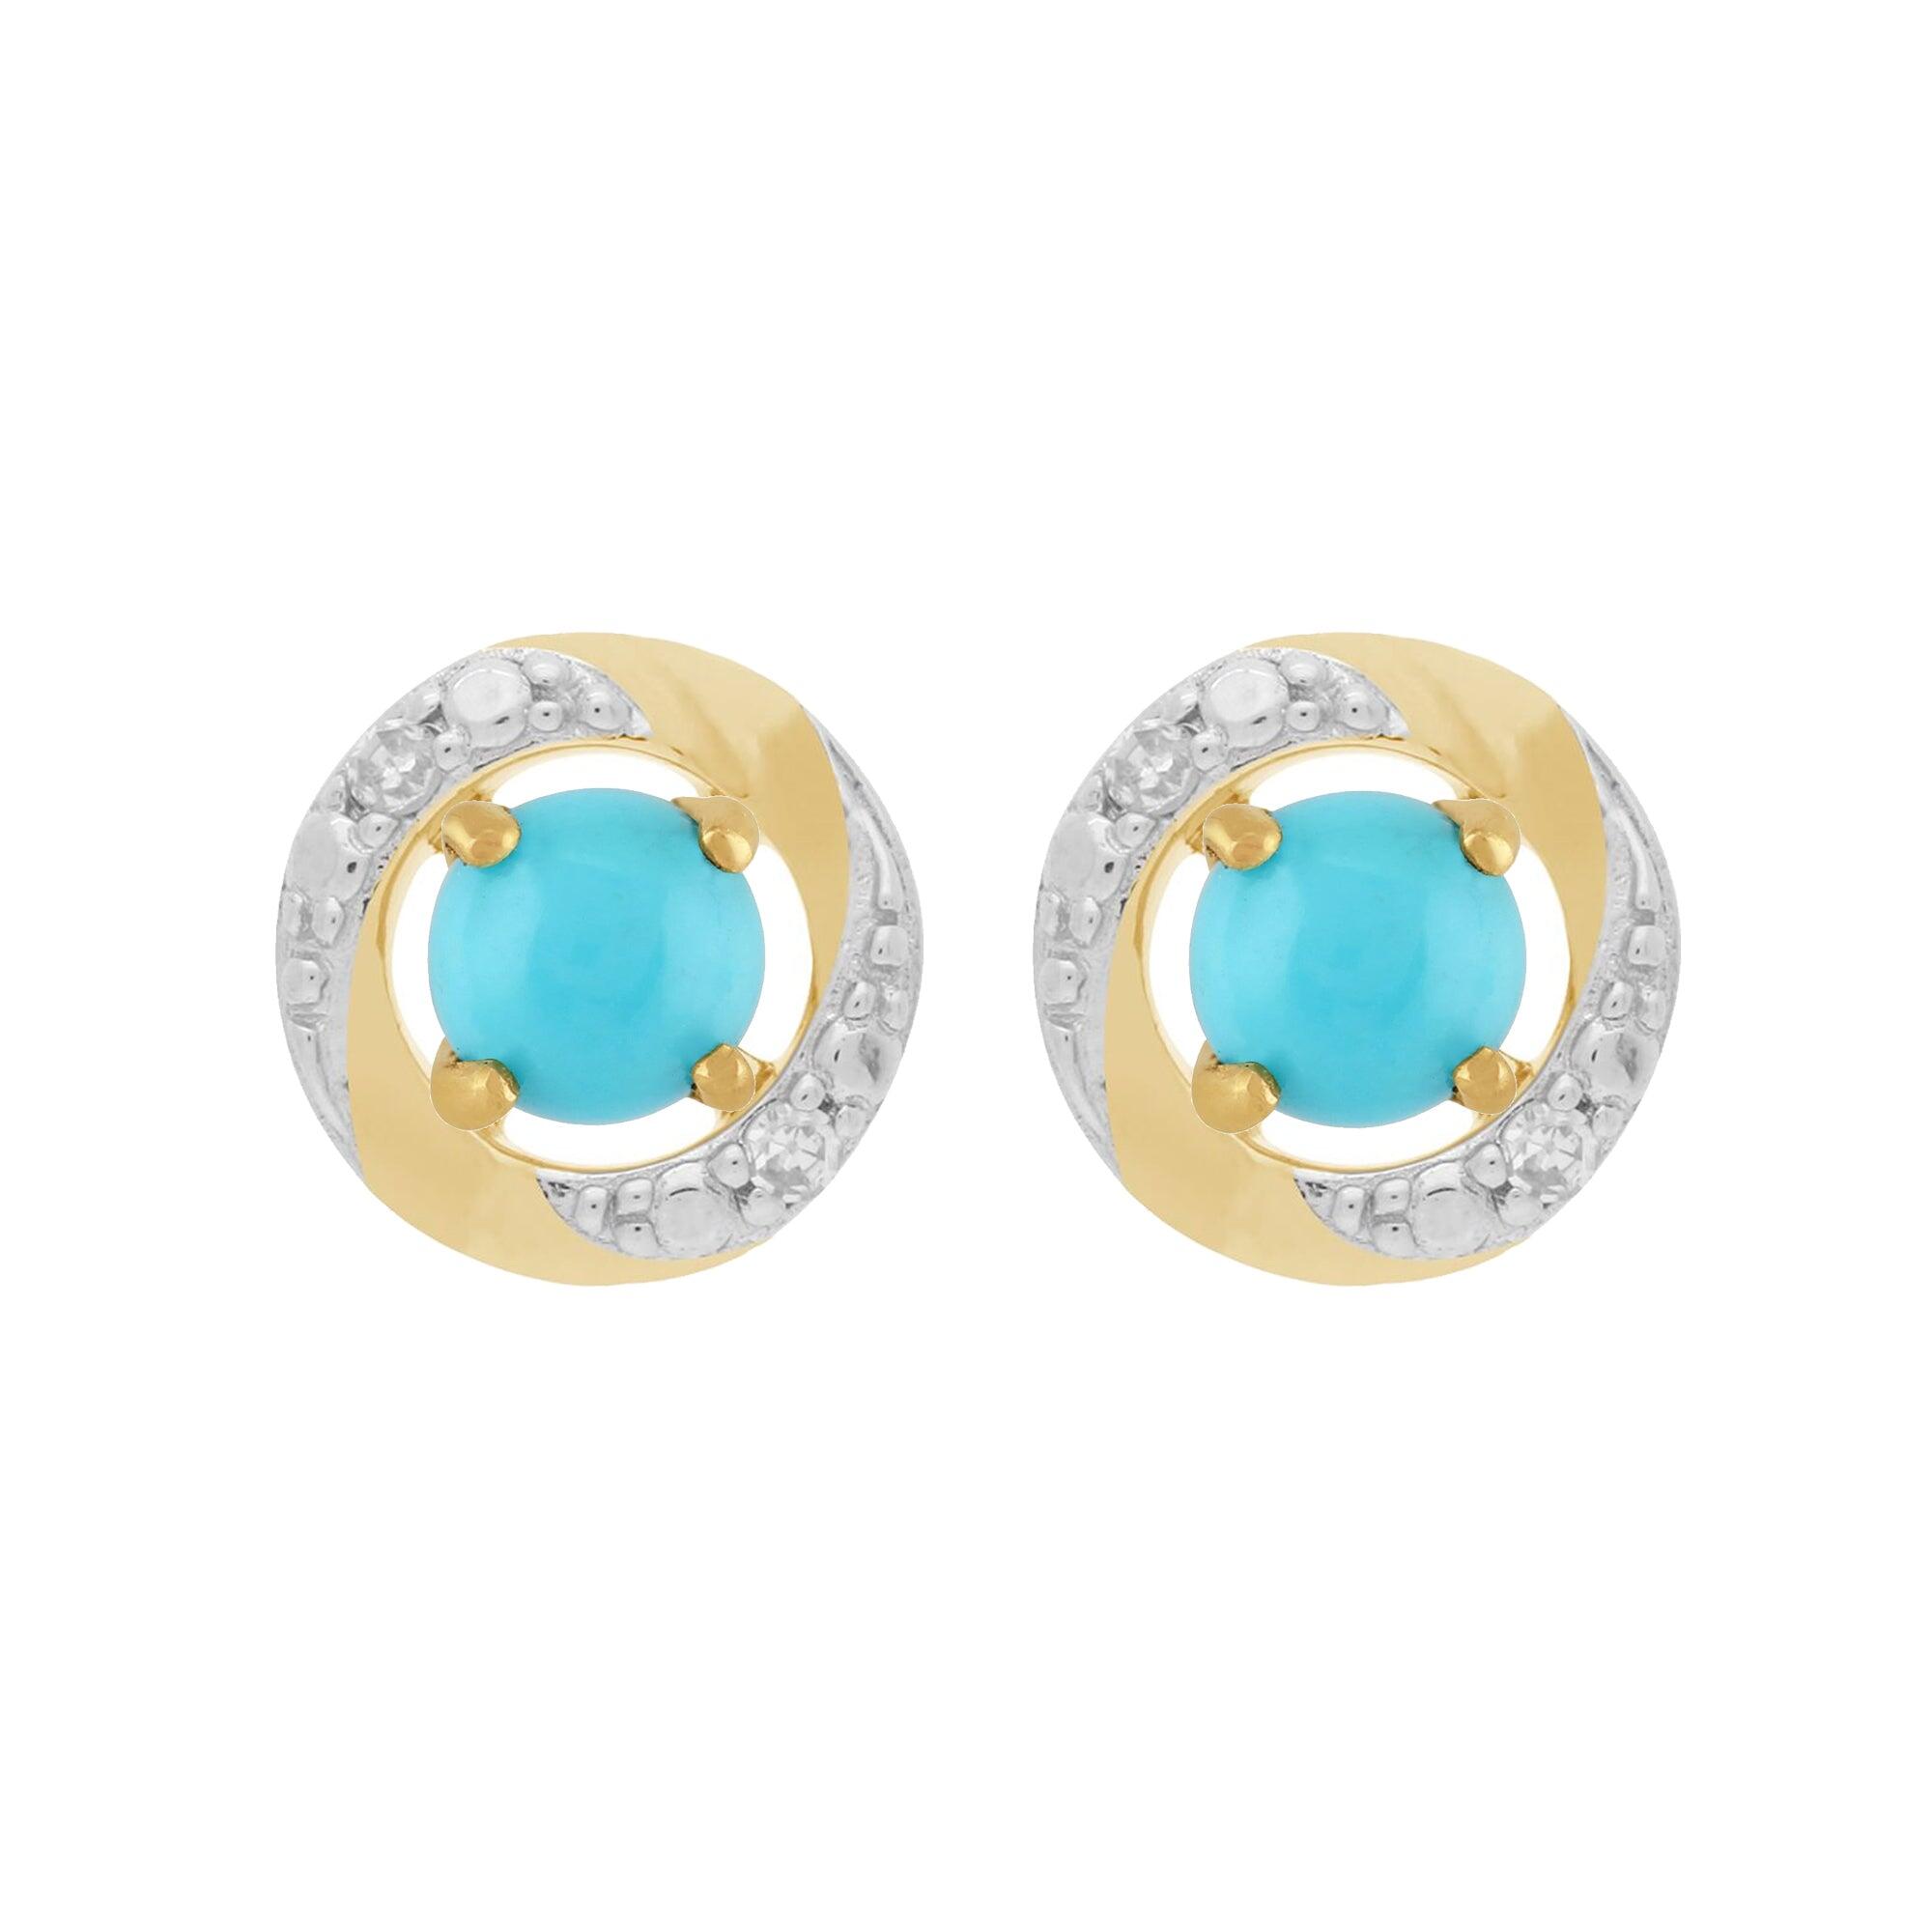 Classic Round Turquoise Stud Earrings with Detachable Diamond Halo Ear Jacket in 9ct Yellow Gold